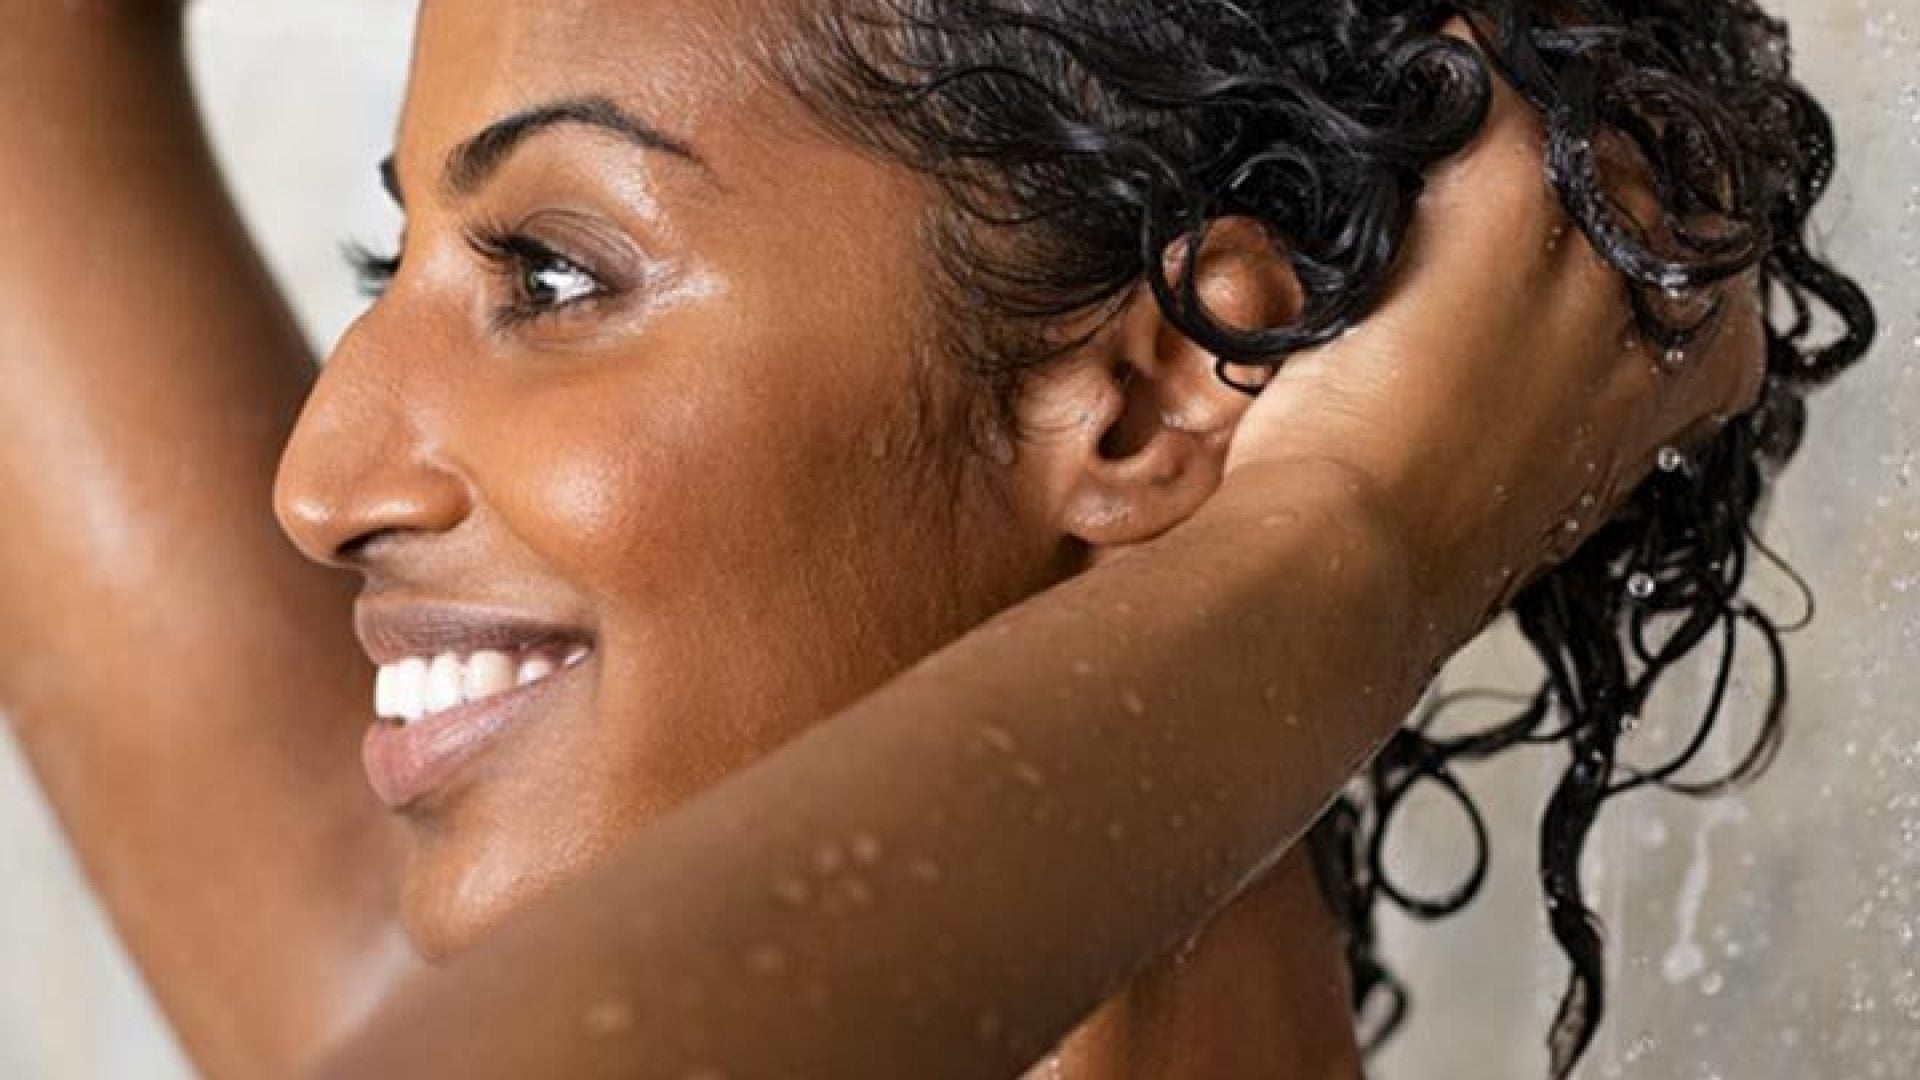 Top 5 Sulfate-Free Shampoos for Textured Hair